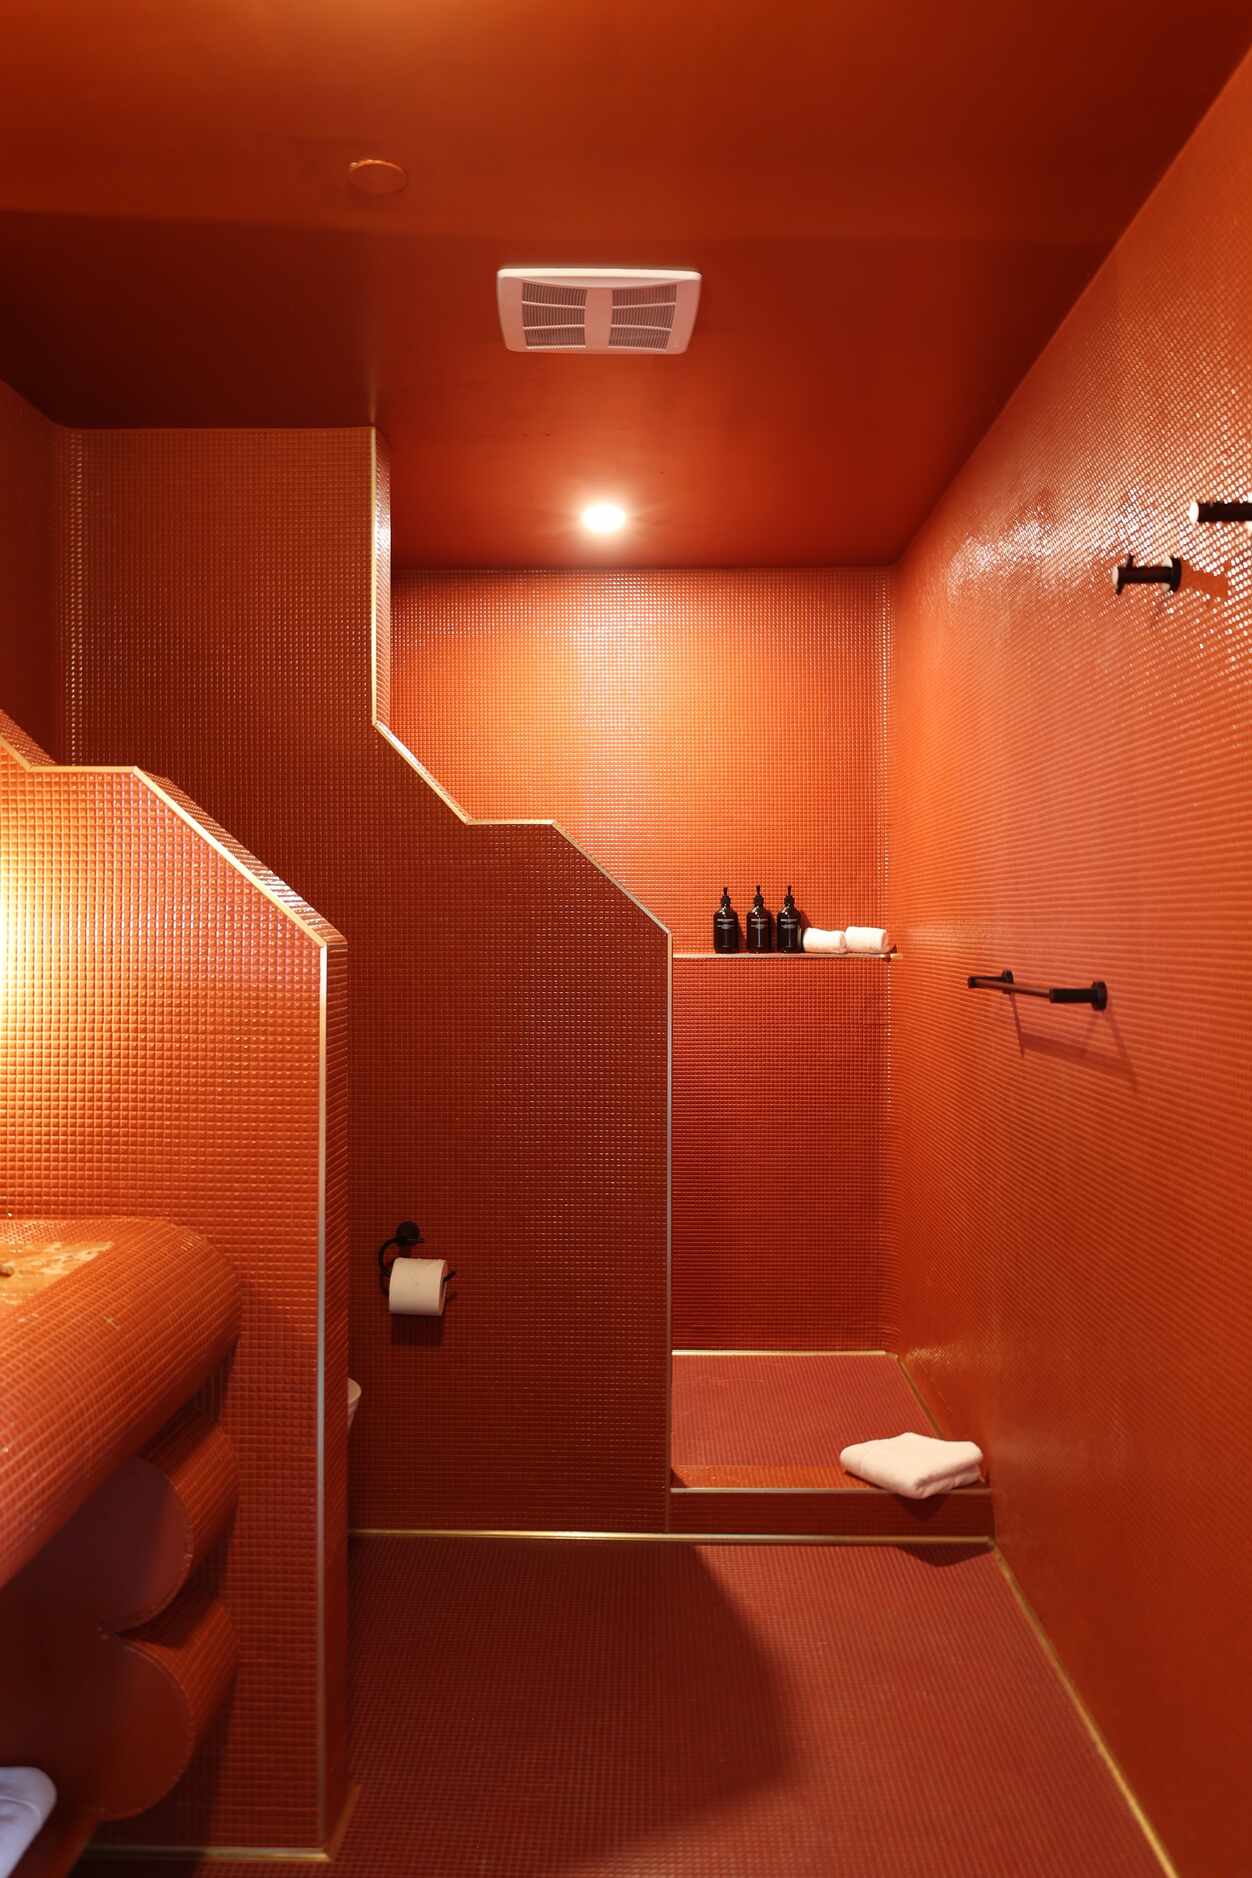 The bathrooms at Hotel Herringbone are monochromatic, designed floor to ceiling with tiny...